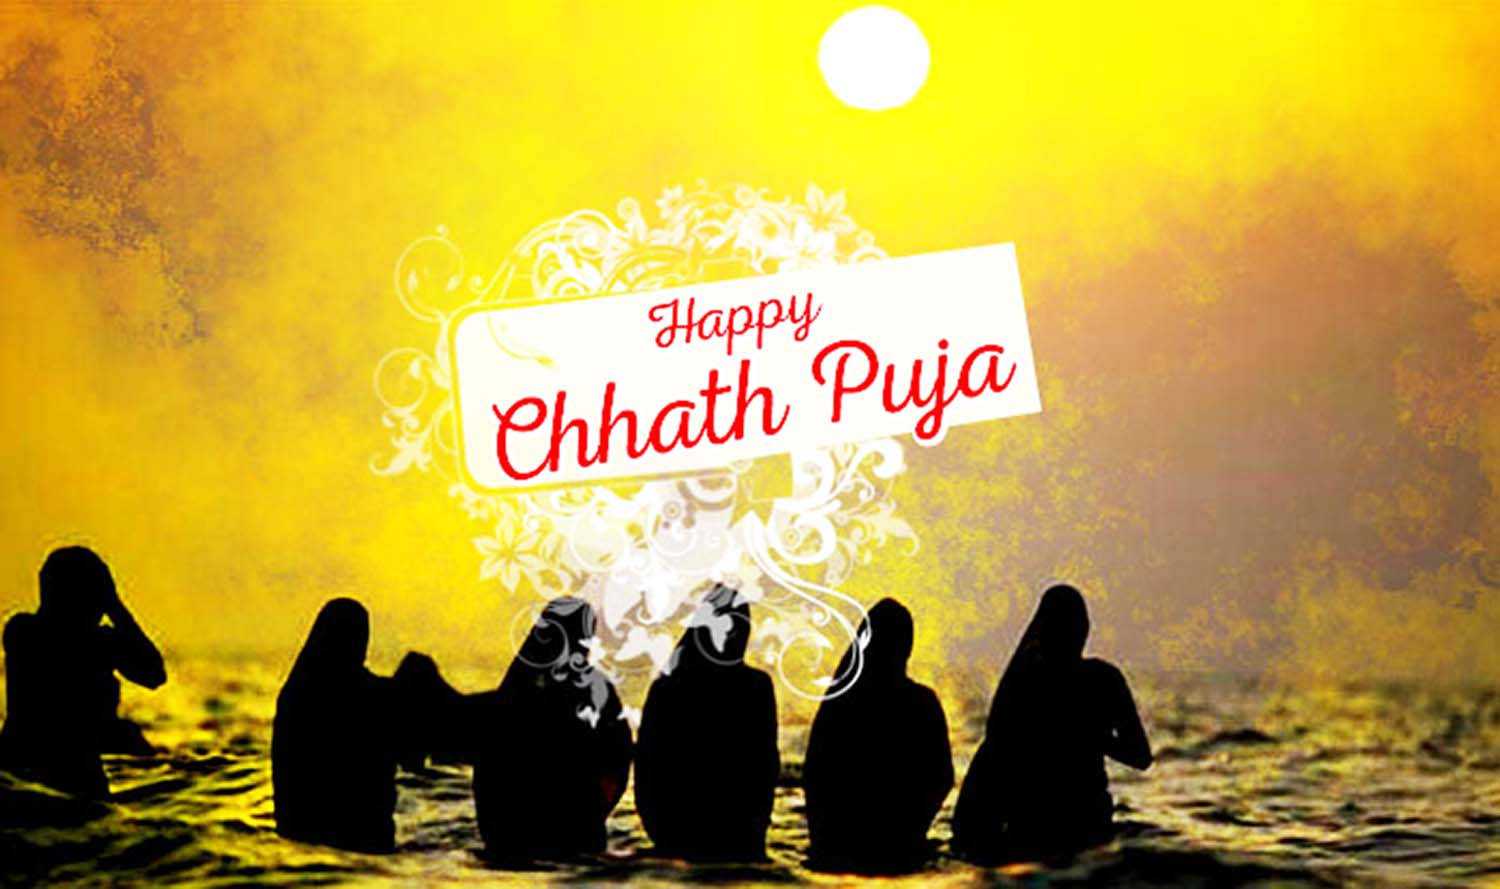 Chhath Puja In Yellow Ocean Abstract Wallpaper